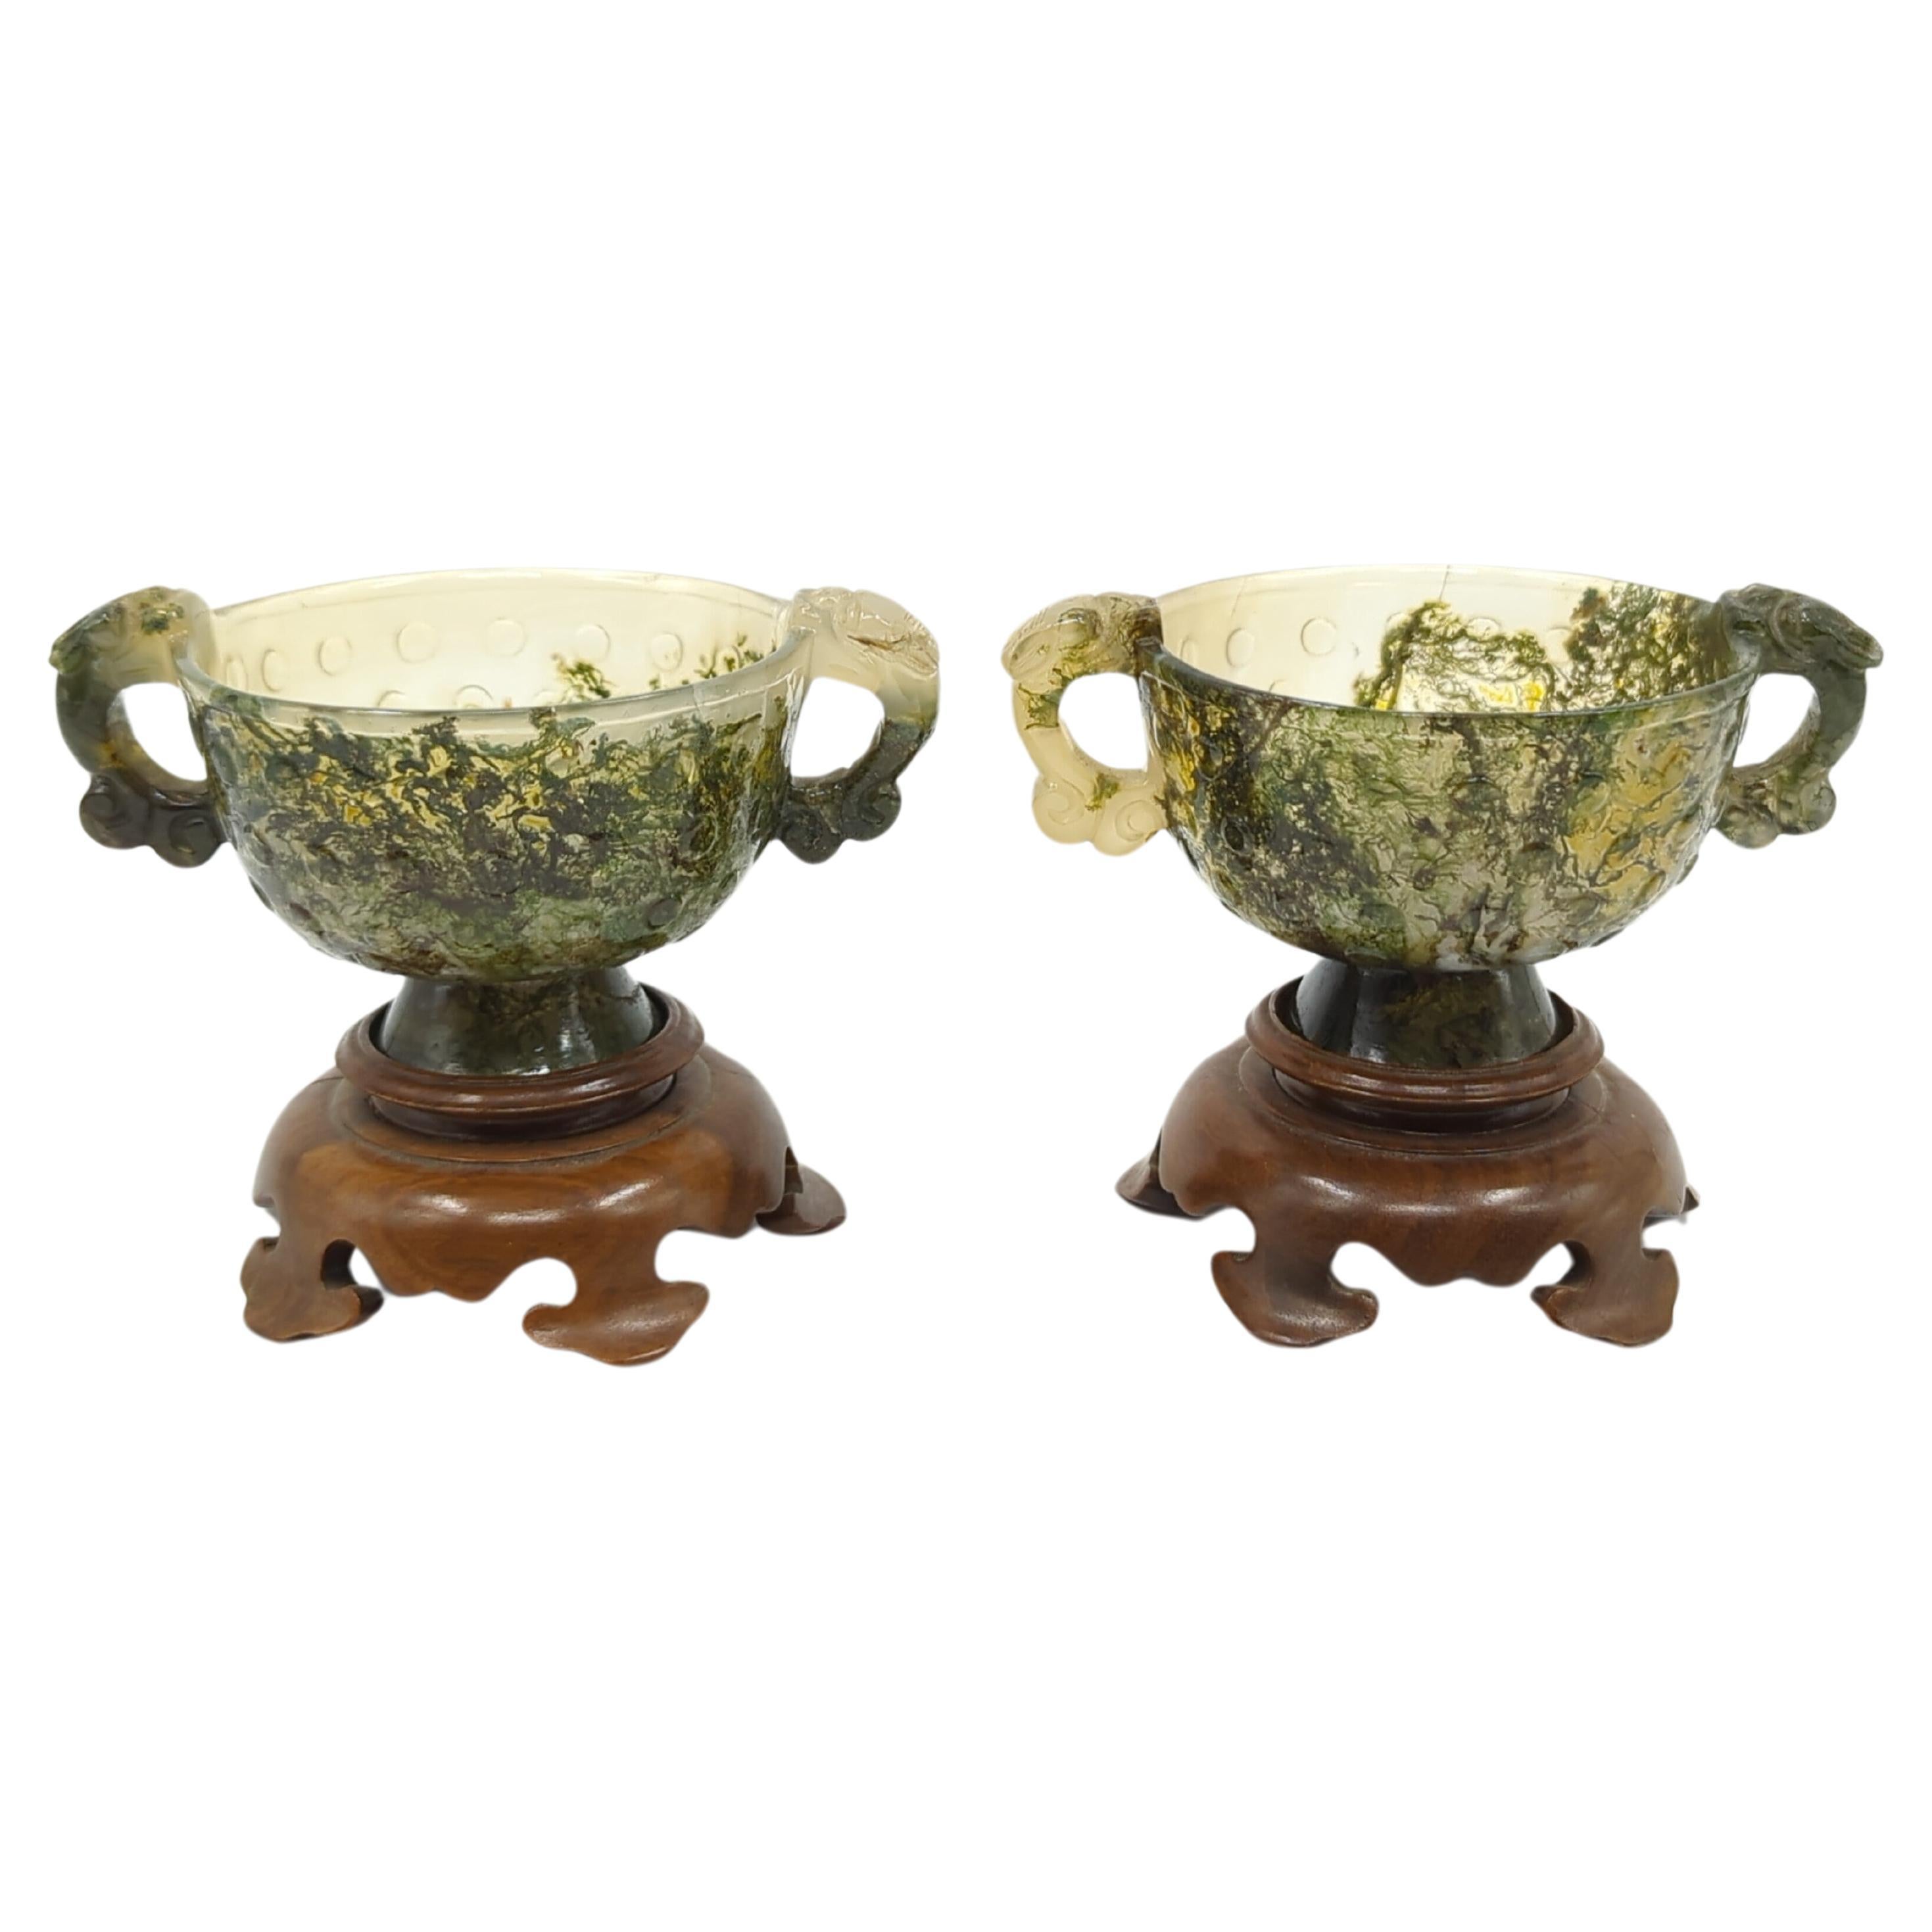 A fine garniture pair of Chinese moss agate carved cups, sides flanked with Qilin handles, relief carved raised grain patterns to exterior of body, thinly lipped mouth ring, and on outward flaring high foot ring. 

Comes with finely carved ruyi